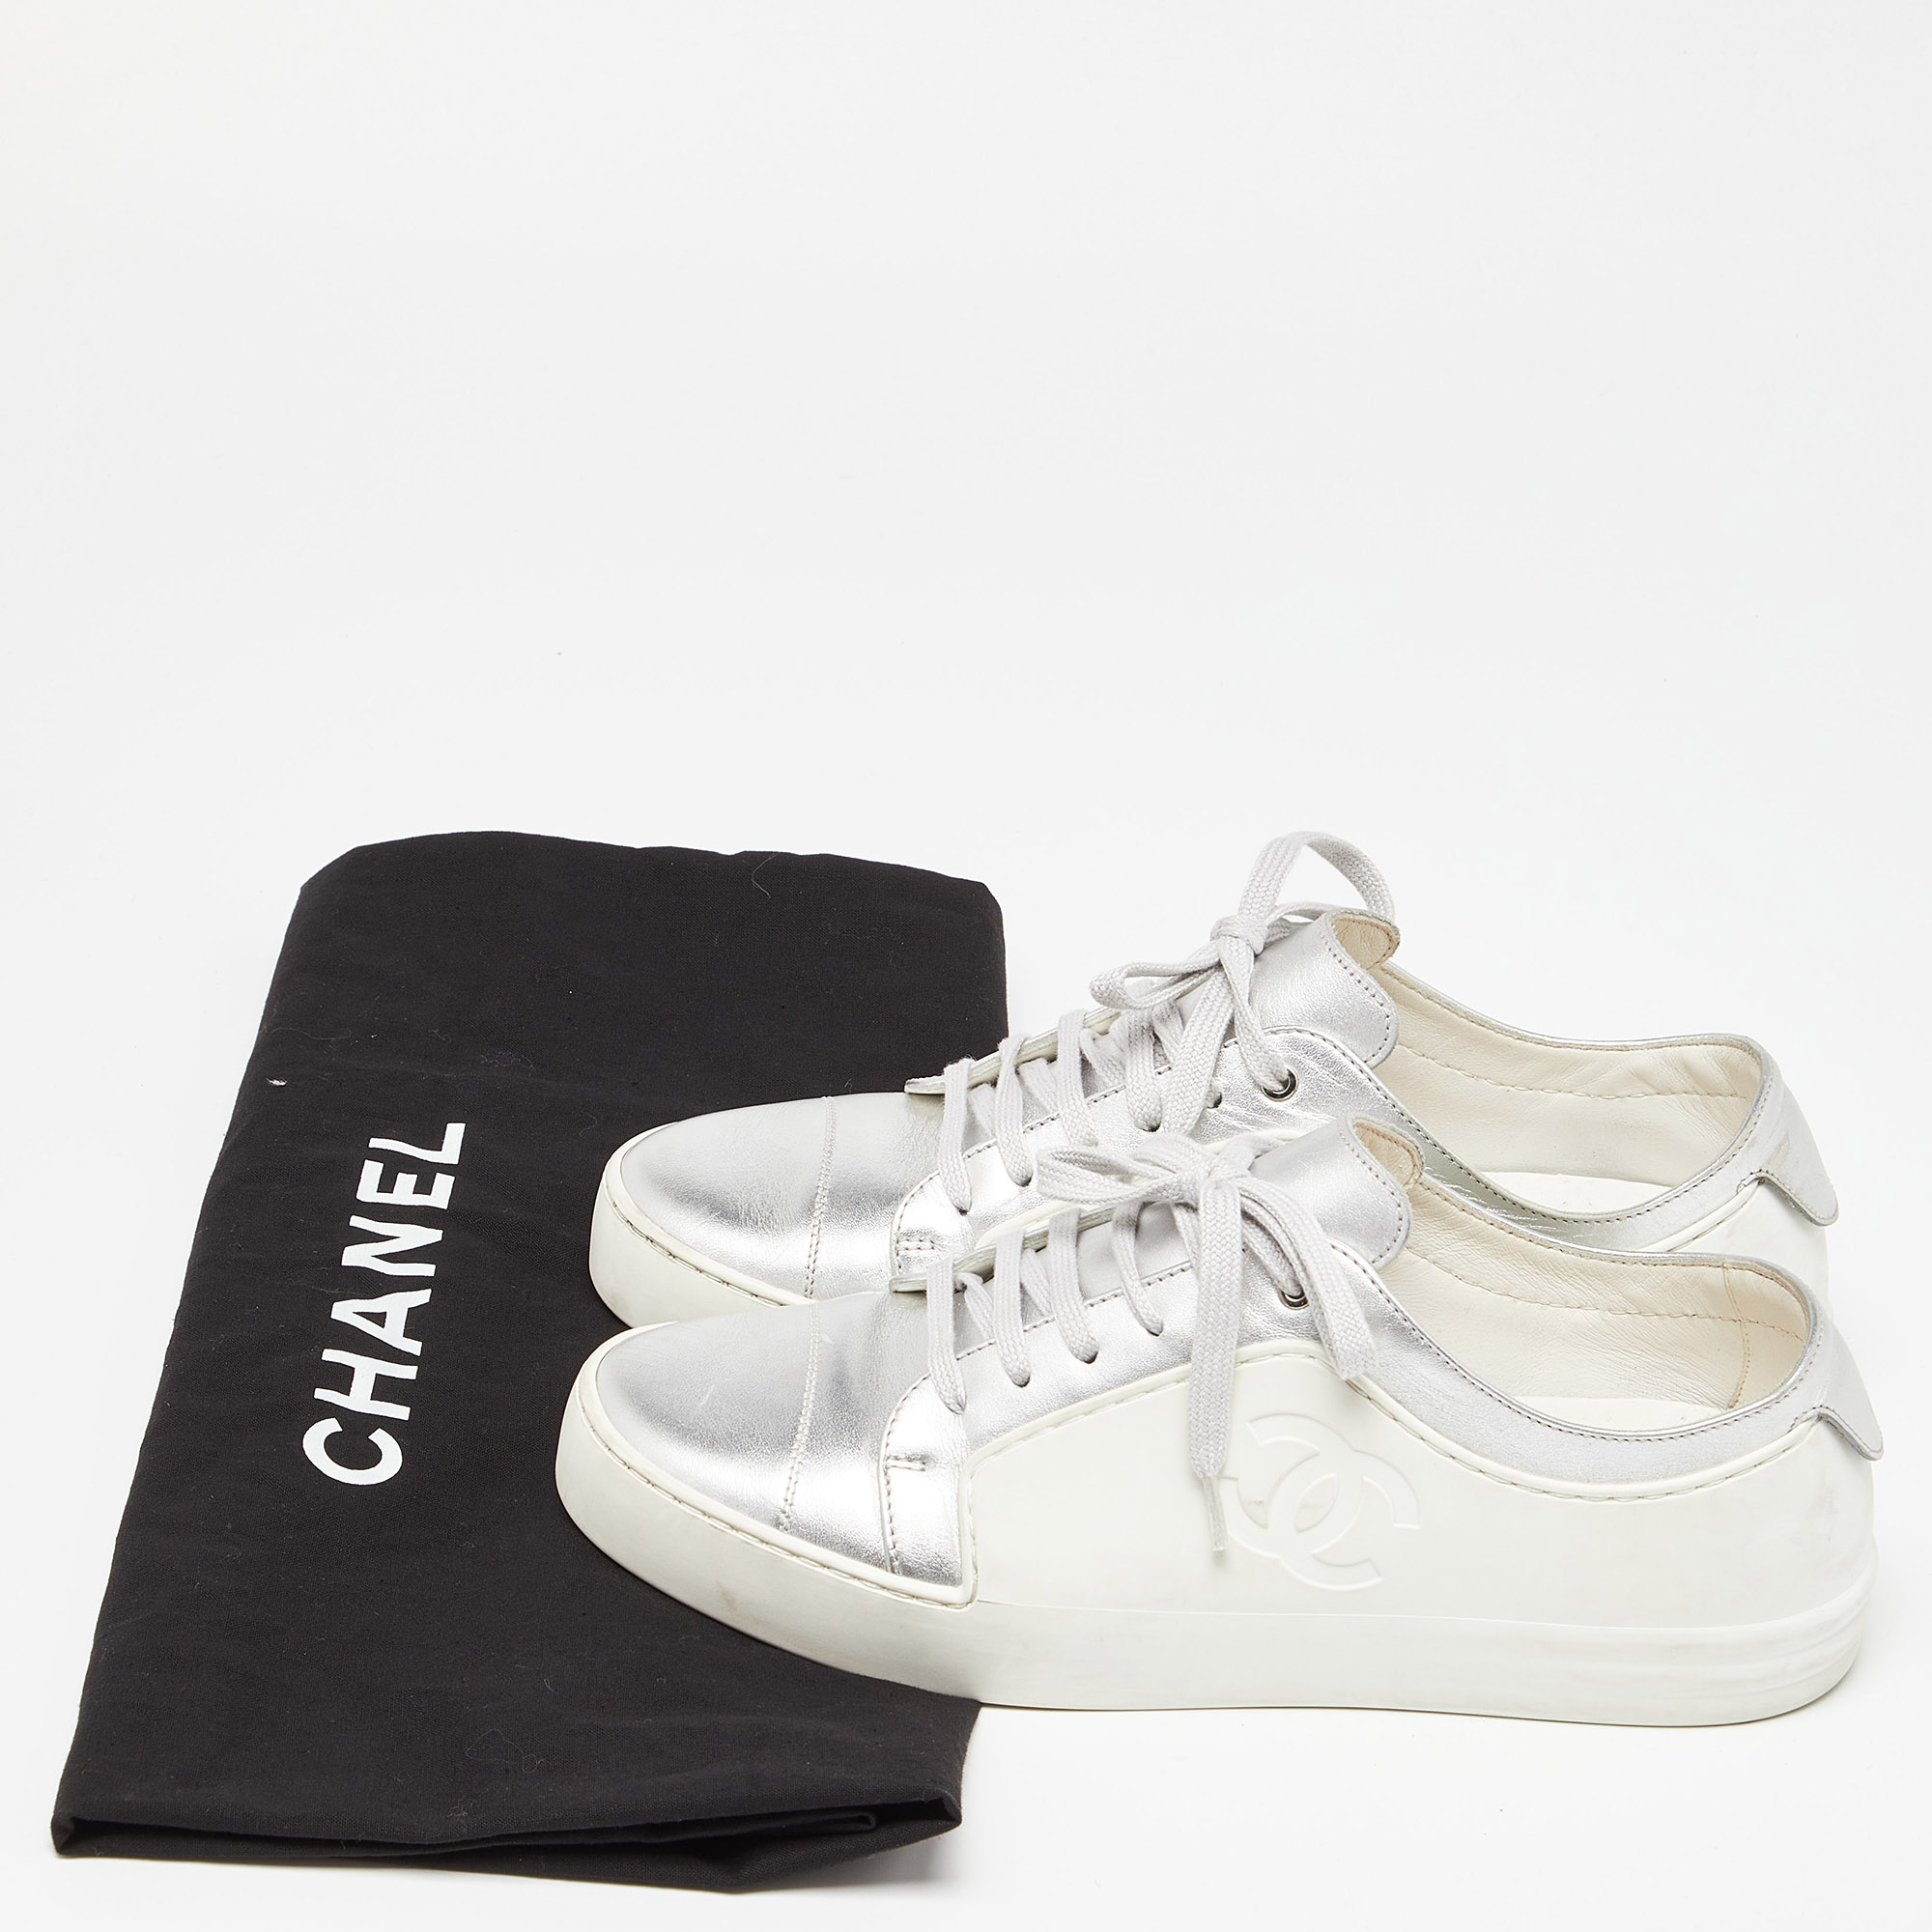 Chanel White/Silver Rubber And Leather CC Low Top Sneakers Size 39